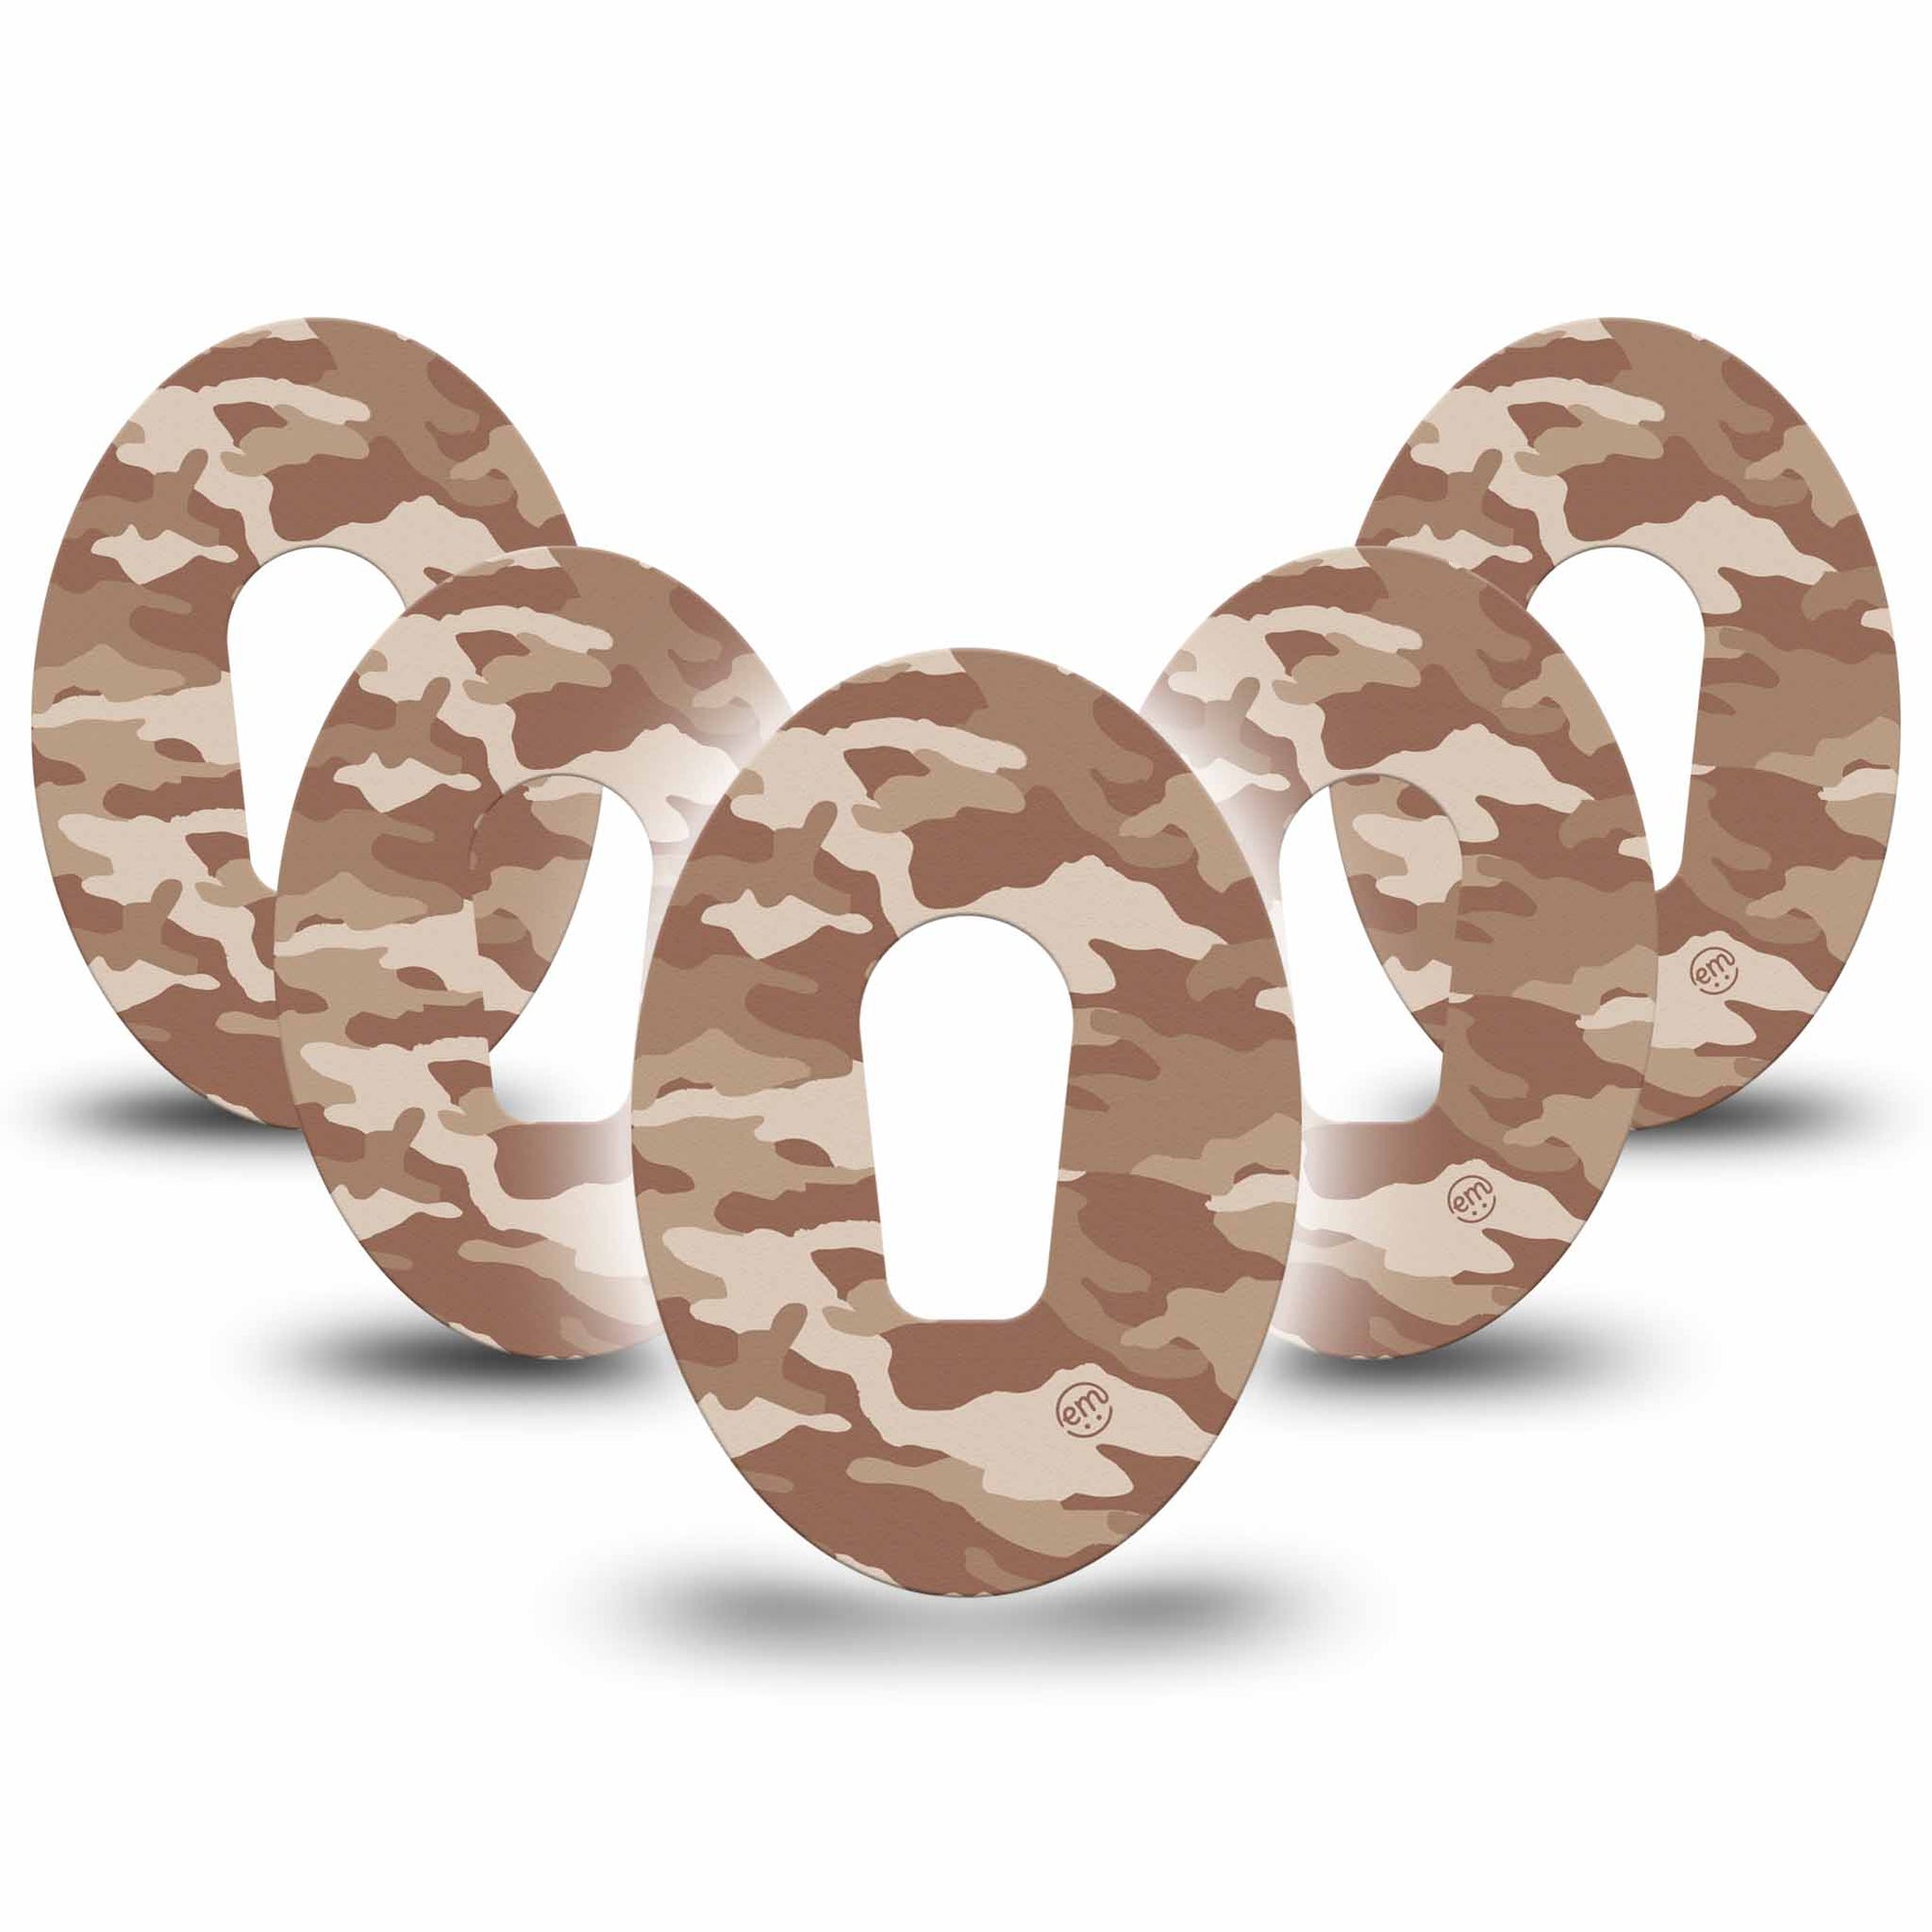 ExpressionMed Desert Camo G6 Tapes